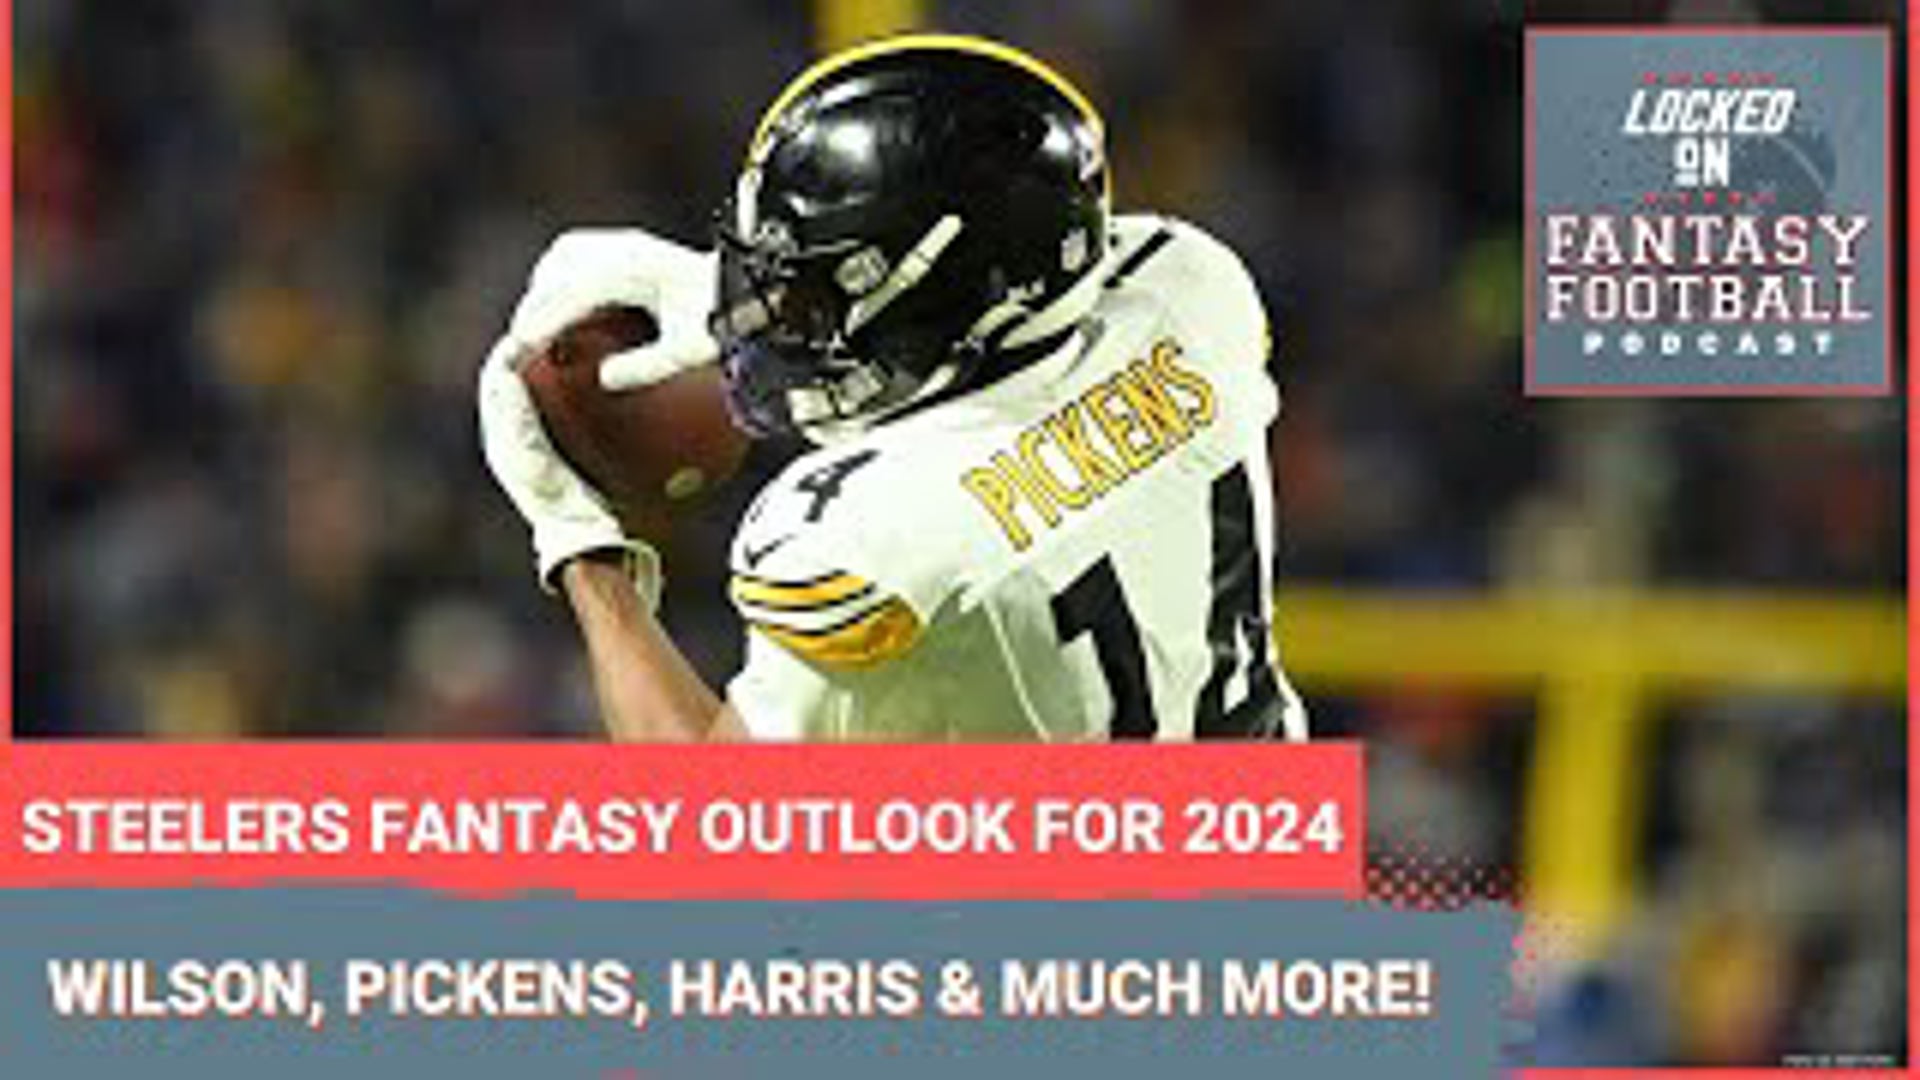 Sporting News.com's Vinnie Iyer and NFL.com's Michelle Magdziuk break down the fantasy football potential of the 2024 Pittsburgh Steelers, including Russell Wilson.